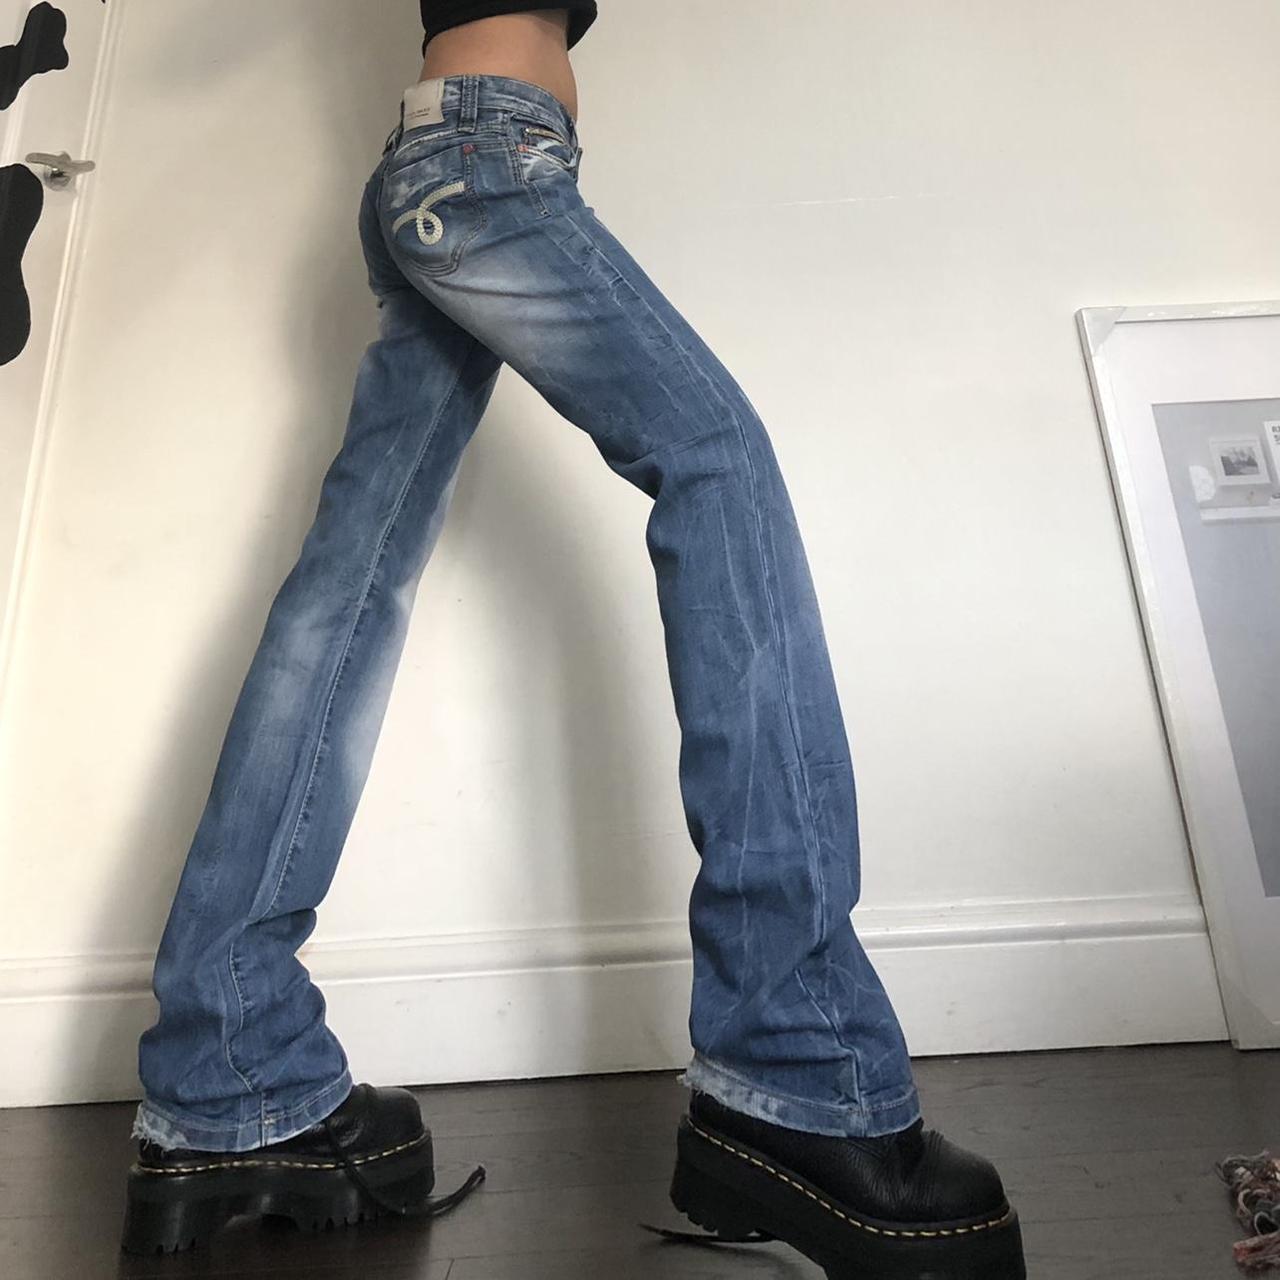 Super low rise Y2K low jeans faded jeans with... - Depop